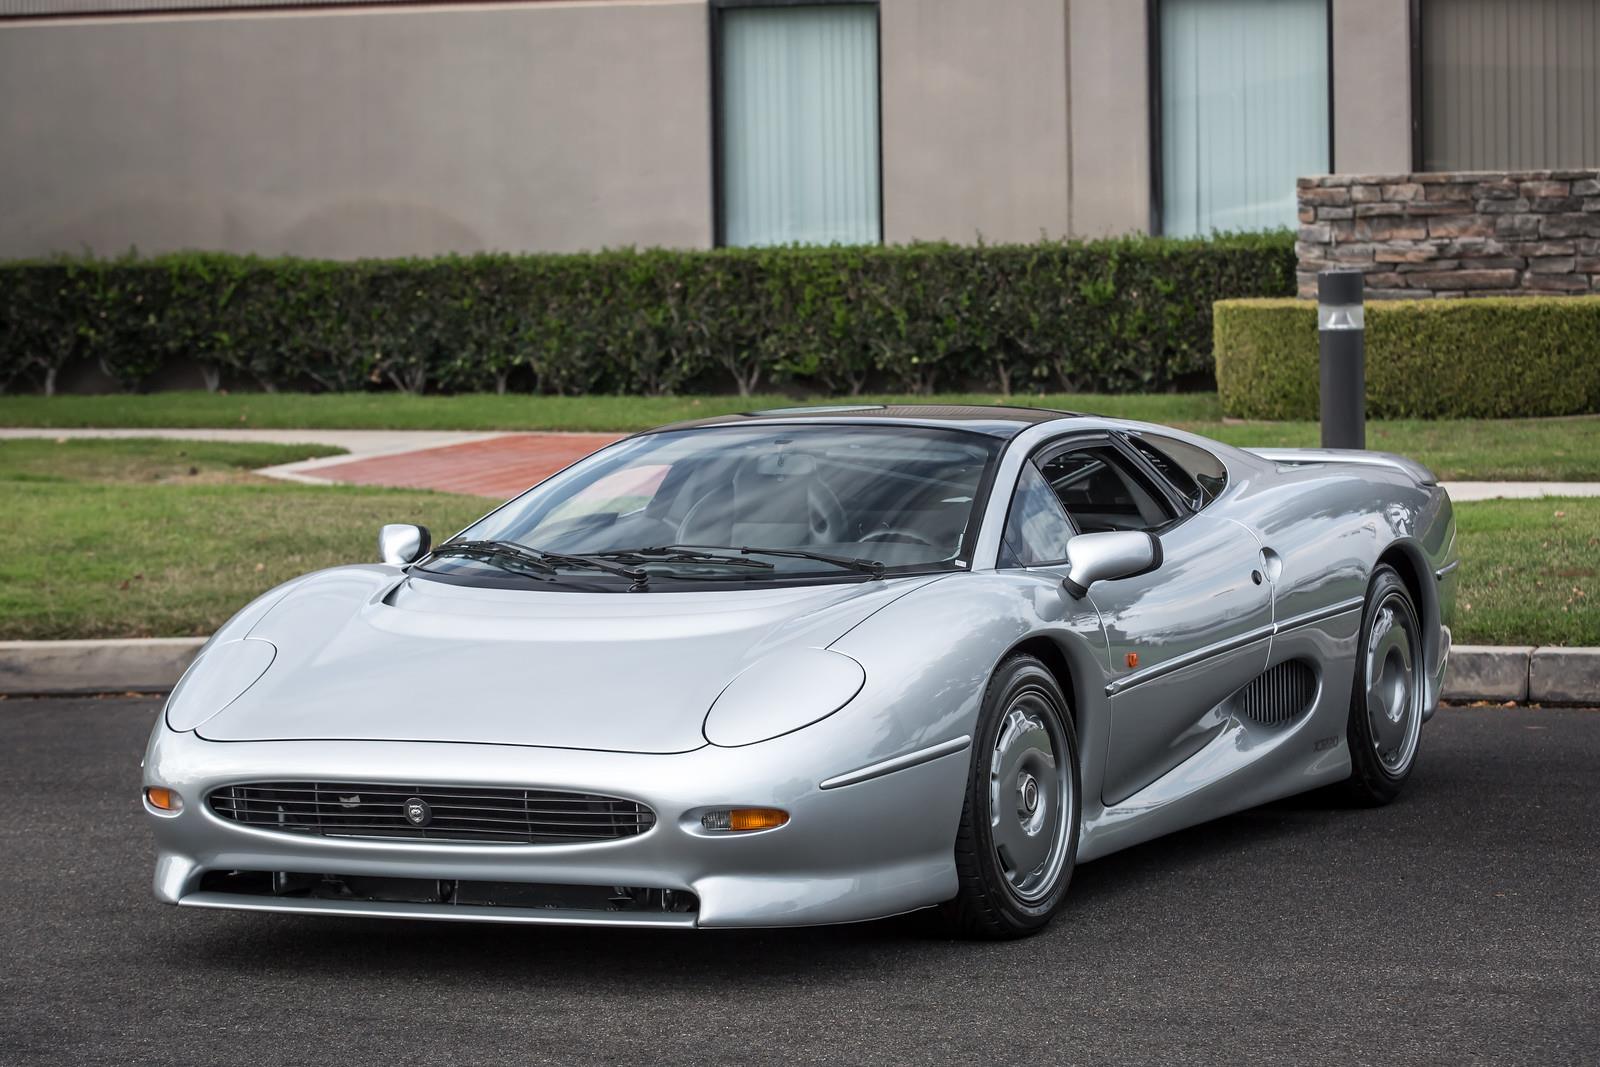 Rare Left Hand Drive Jaguar XJ220 For Sale in the US ...